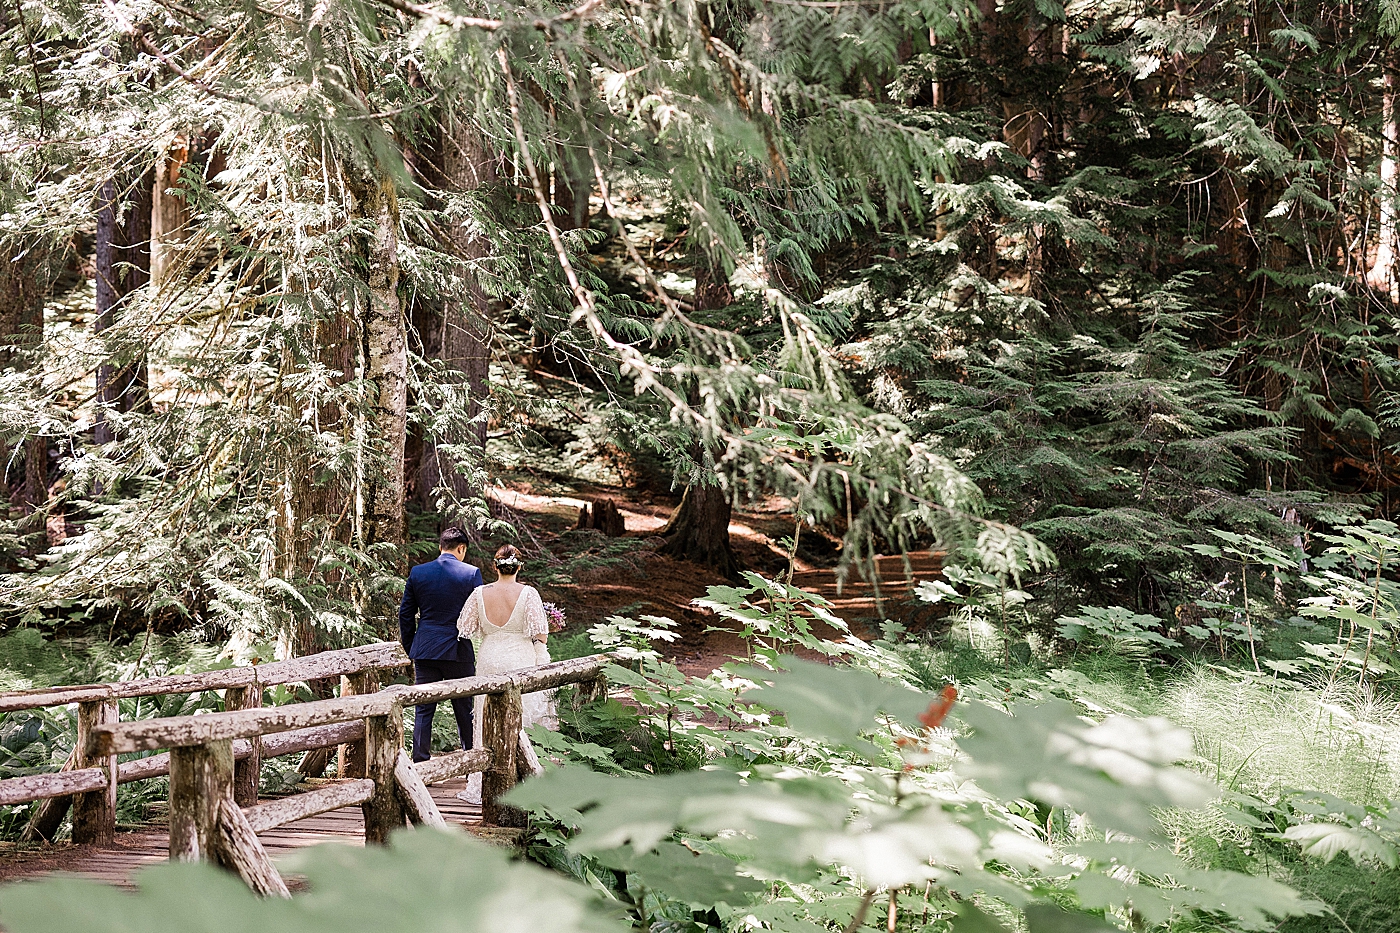 Bride and groom walking through the forest at Mt Rainier. Photo by Megan Montalvo Photography.